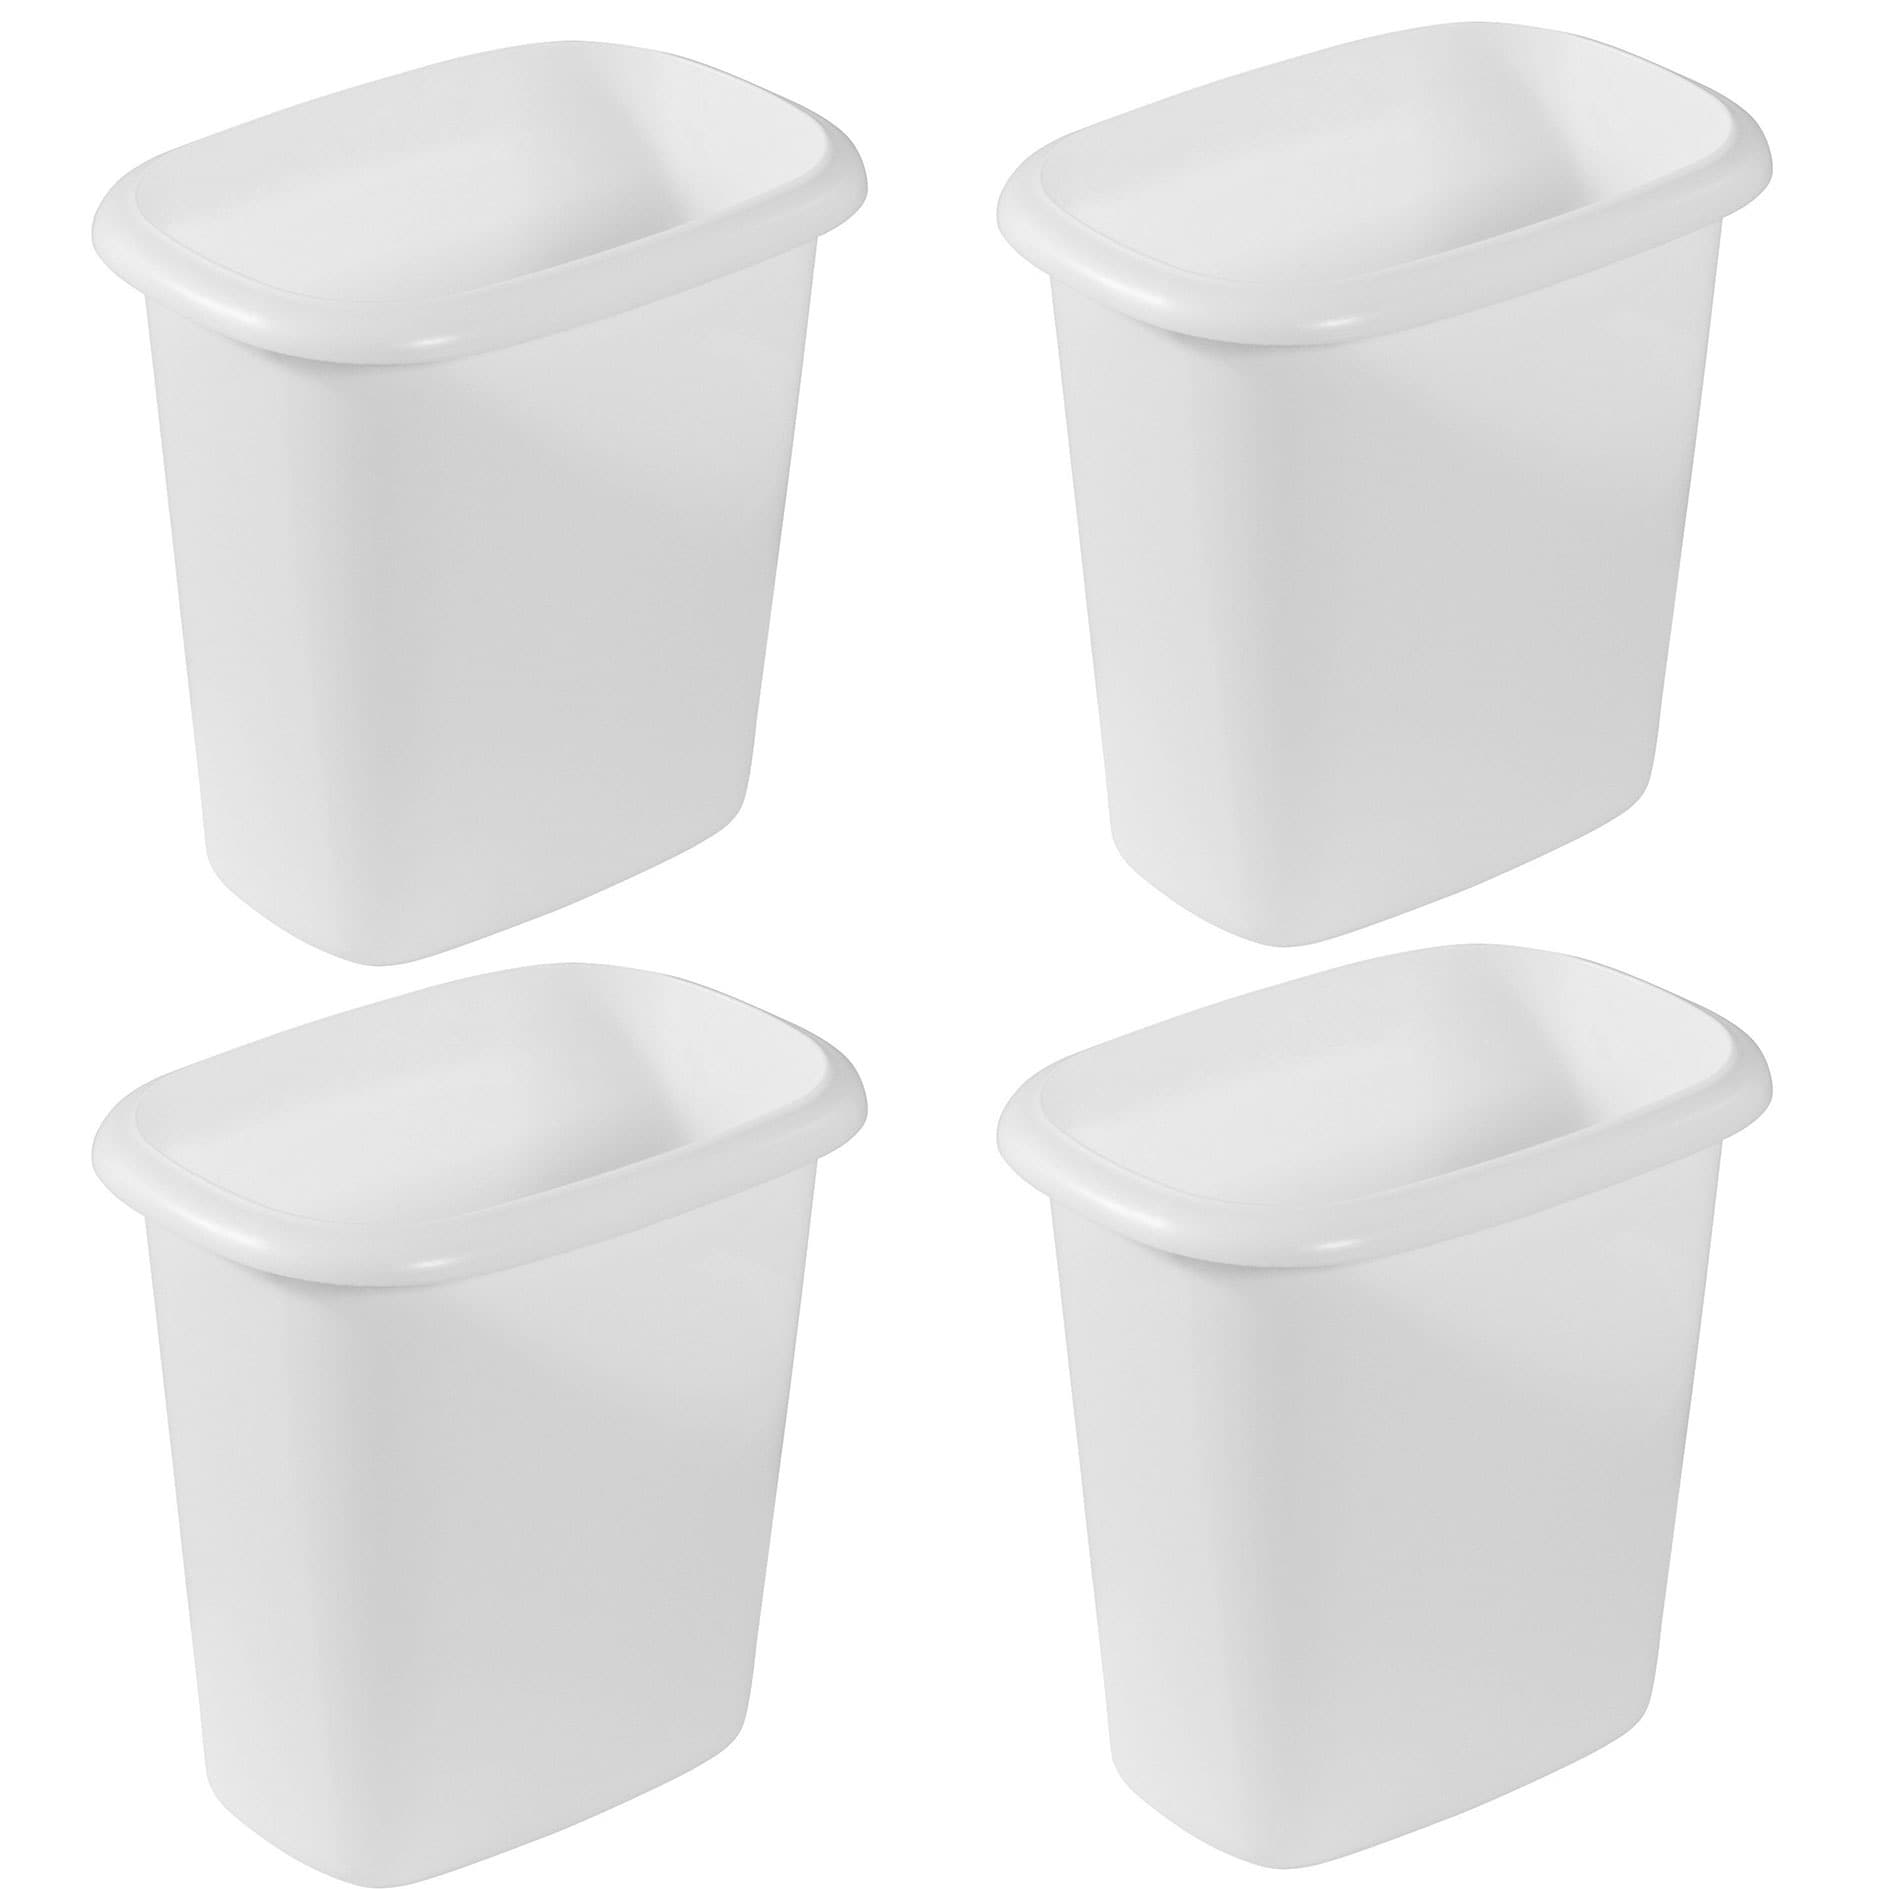 Rubbermaid 13 Gal. White Spring-Top Wastebasket FG5L5806WHT - The Home Depot